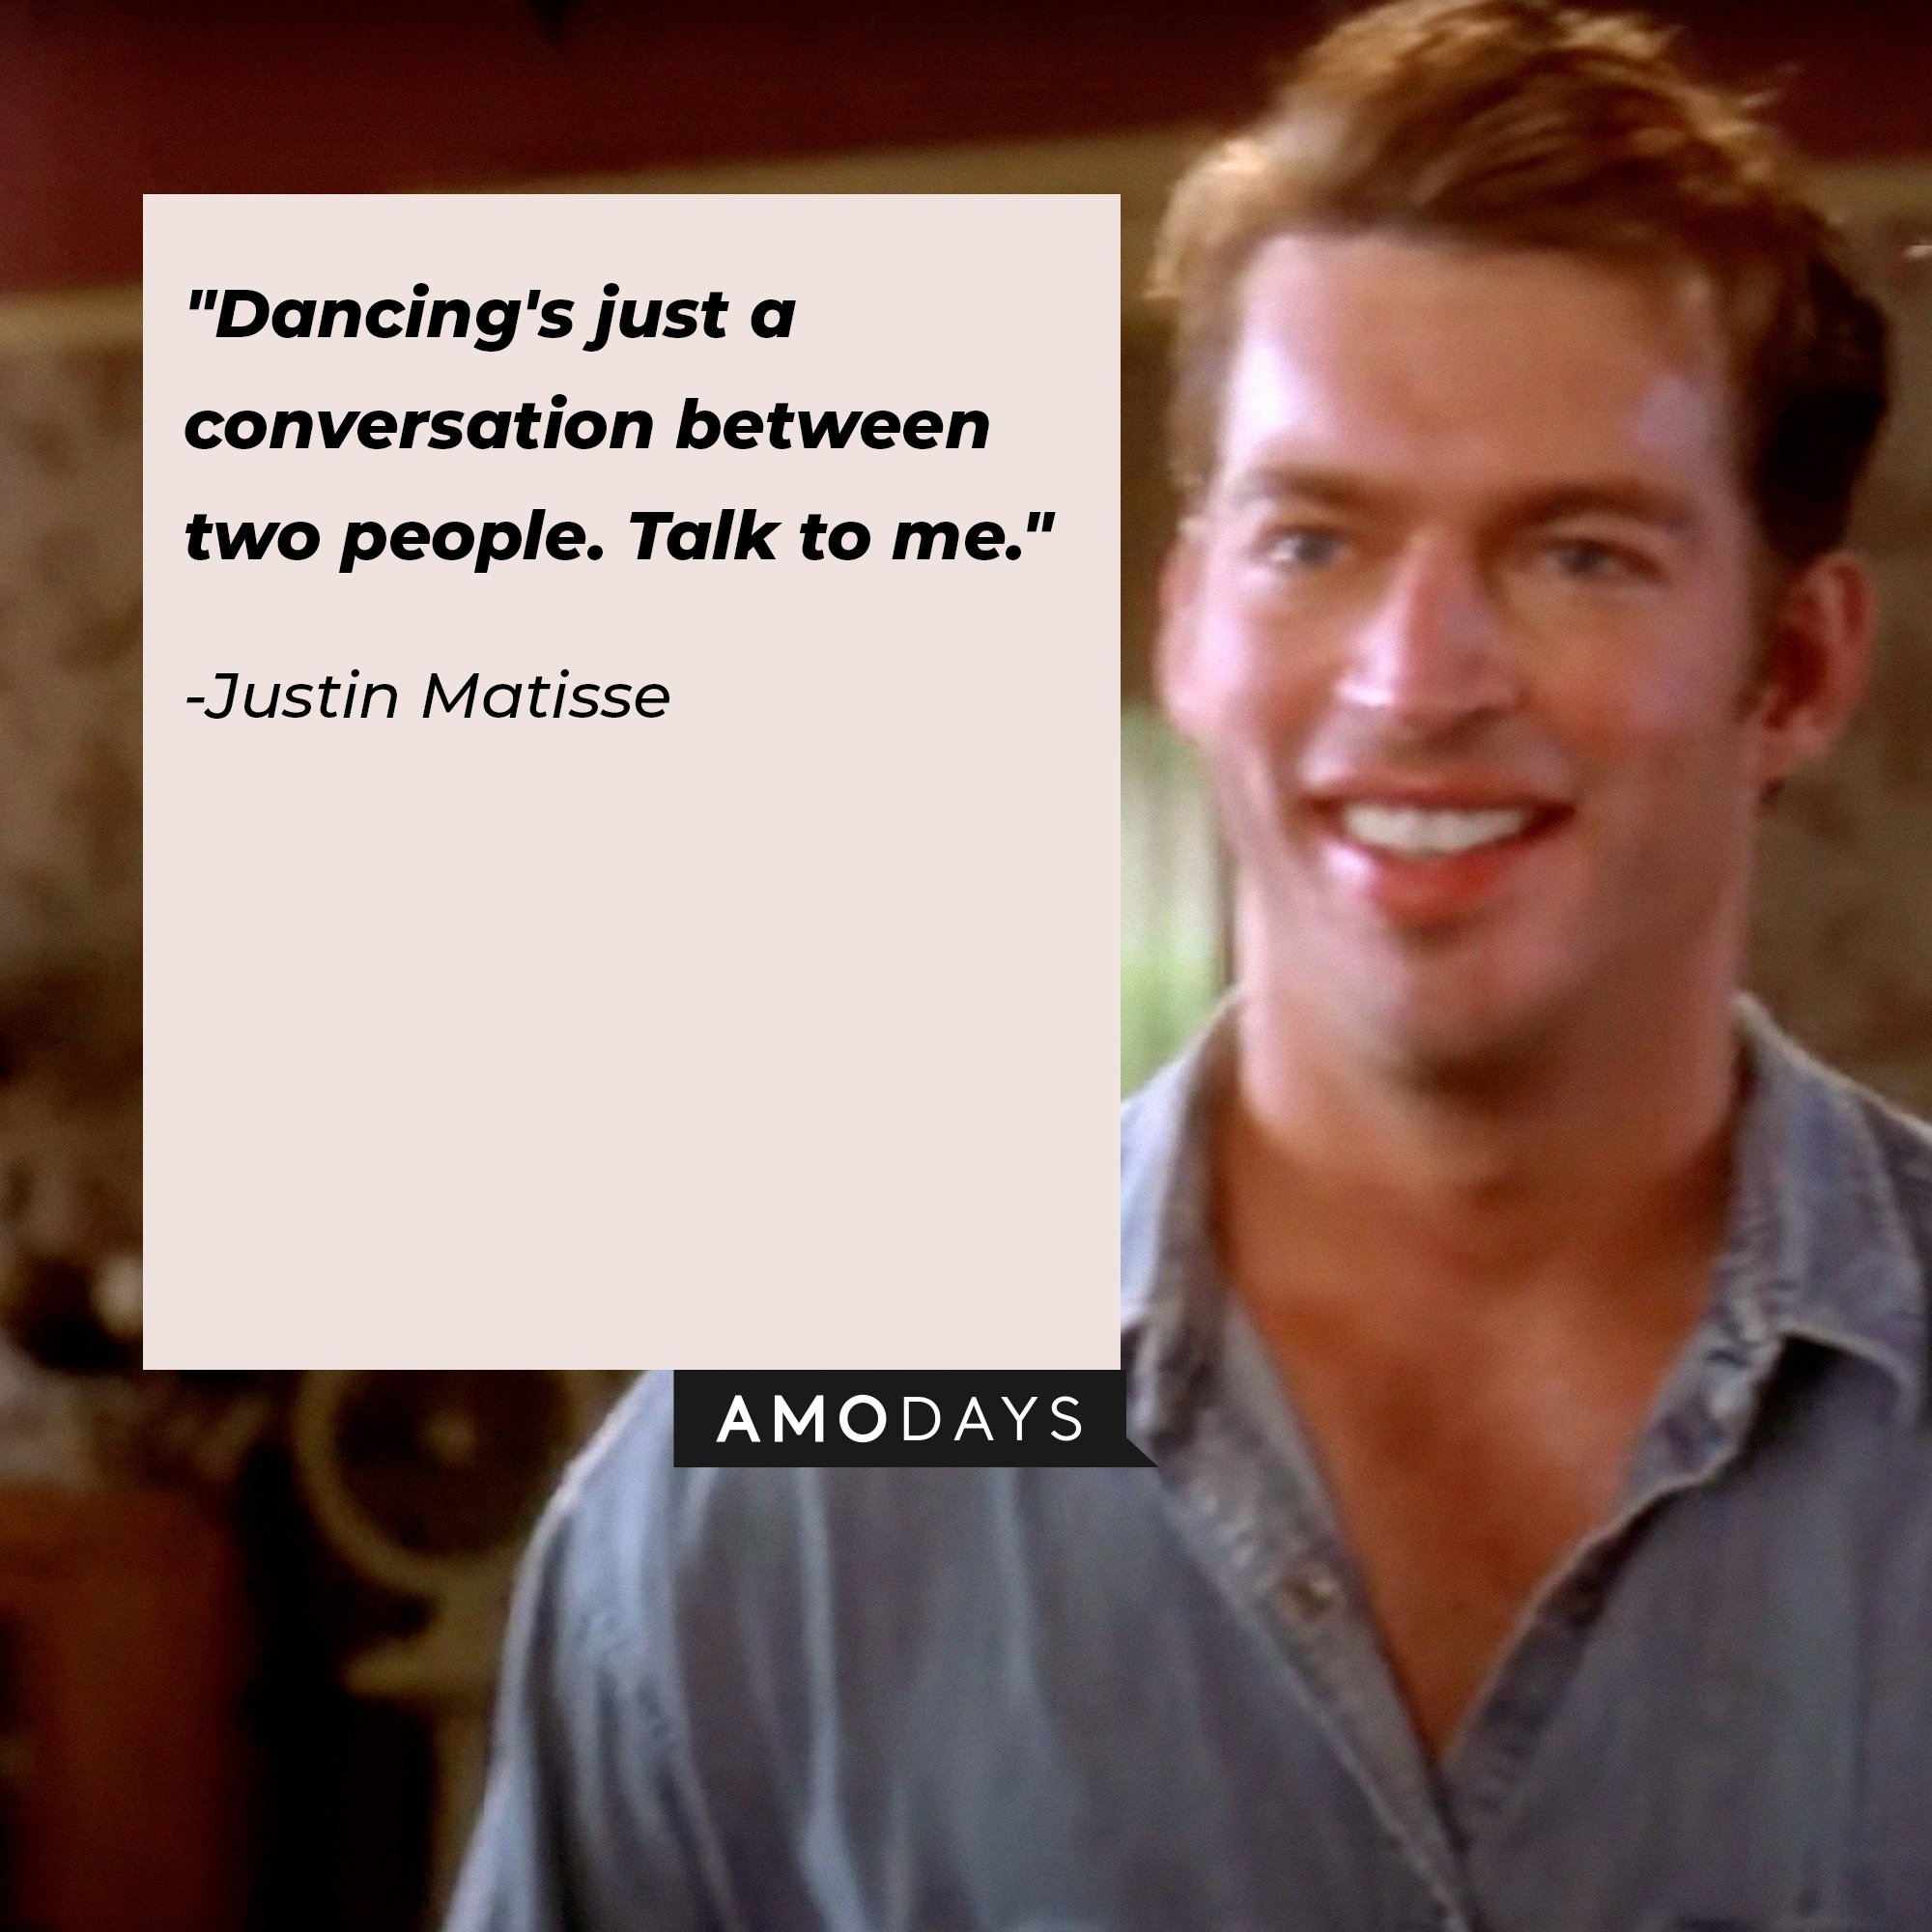  Justin Matisse’s quote: "Dancing's just a conversation between two people. Talk to me."  |  Image: AmoDays